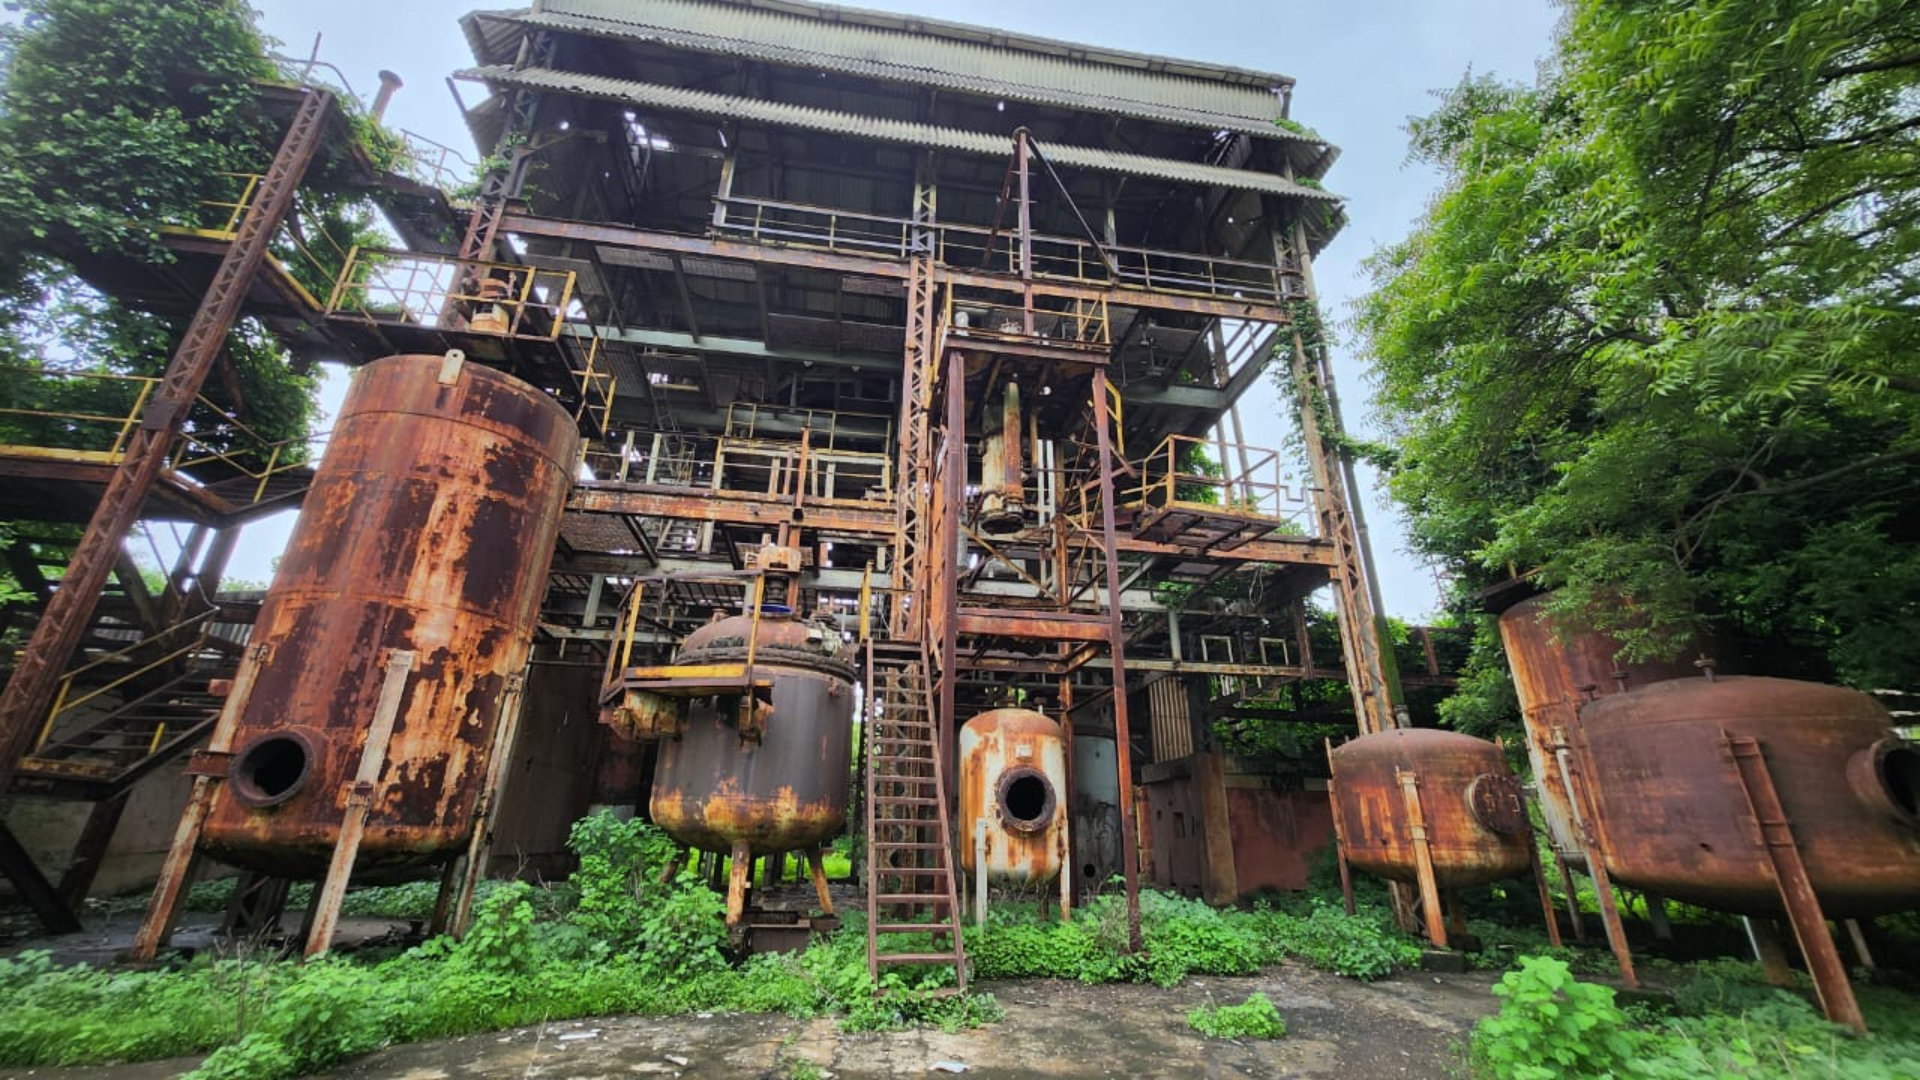 40 Years After Bhopal Gas Tragedy, Hazardous Waste Disposal Raises New Alarms